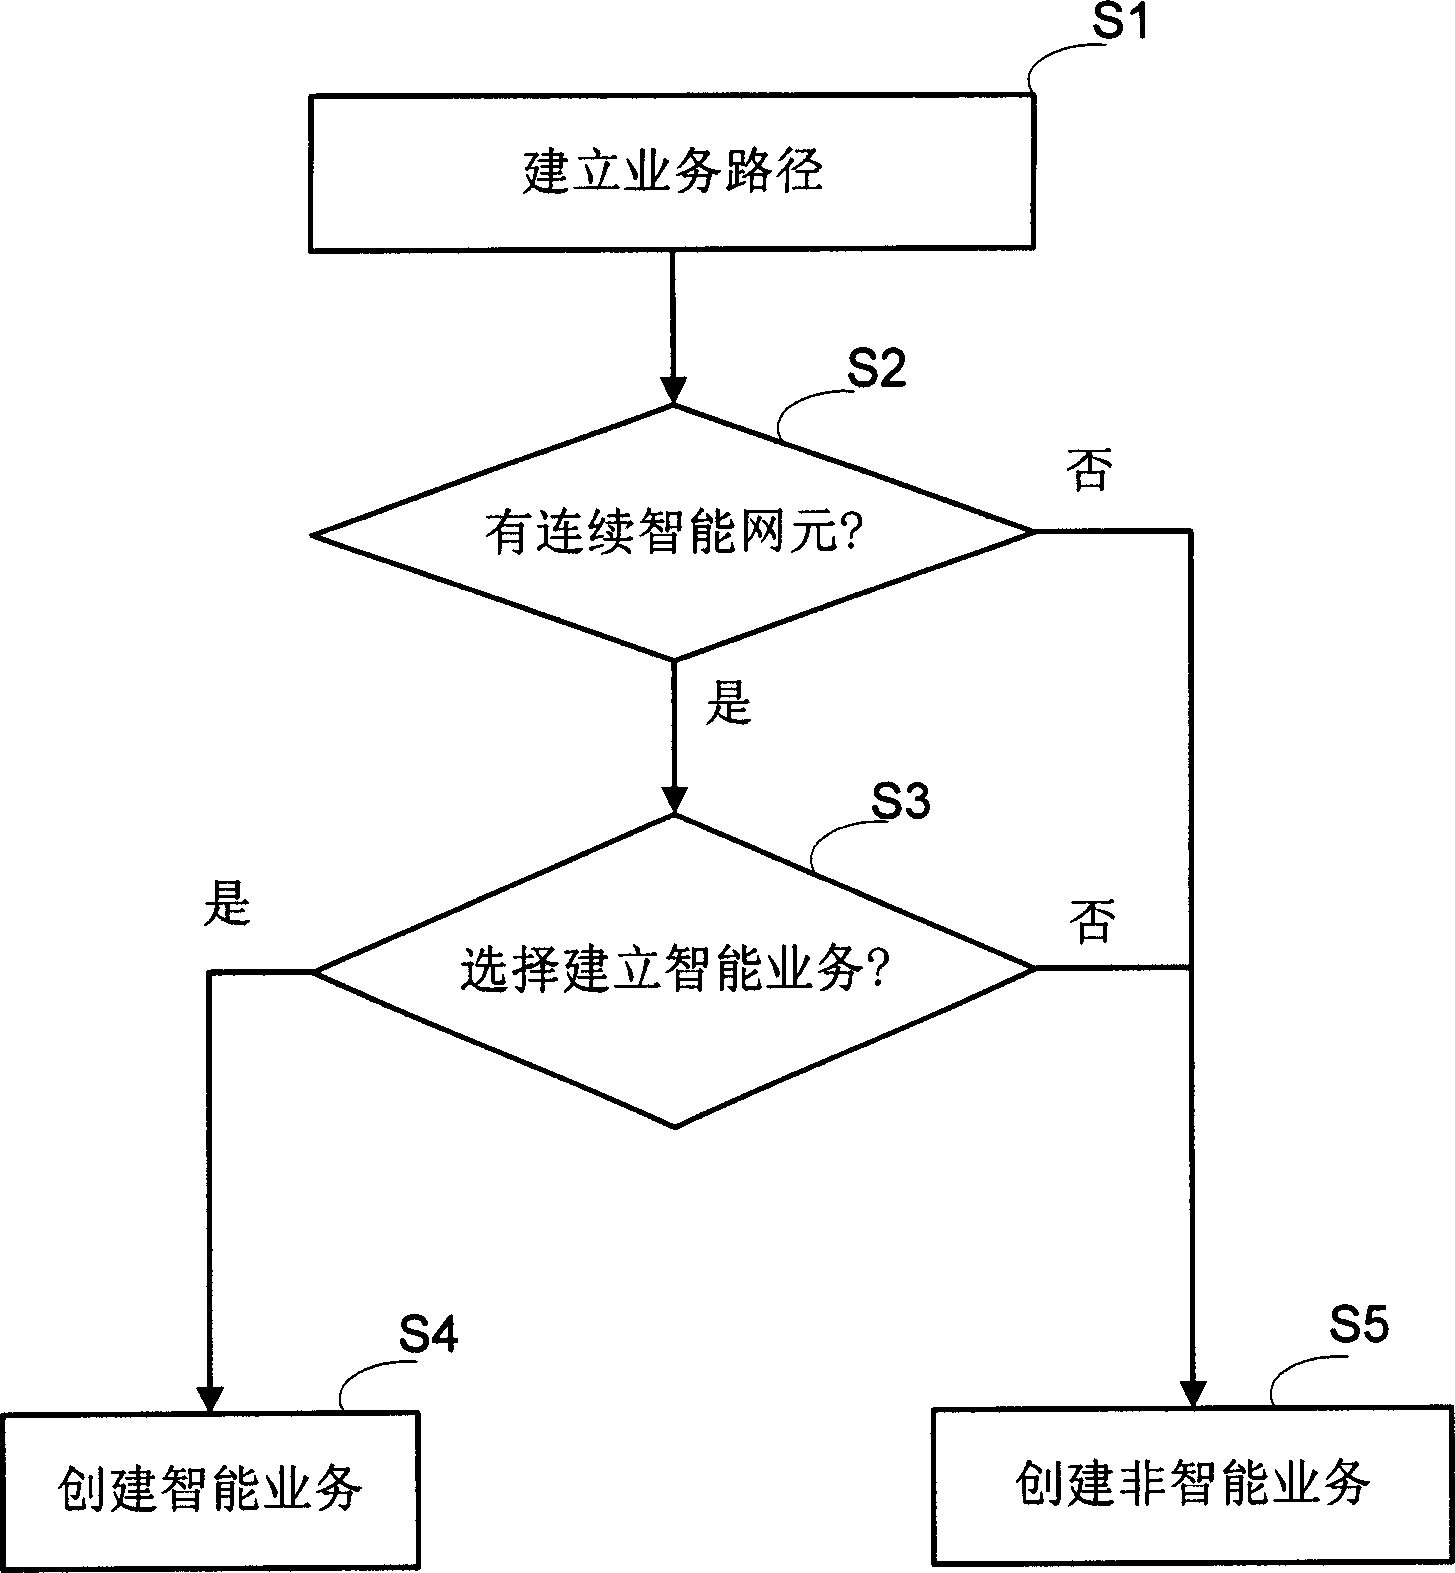 Optical network management system and method for implementing services from end-to-end